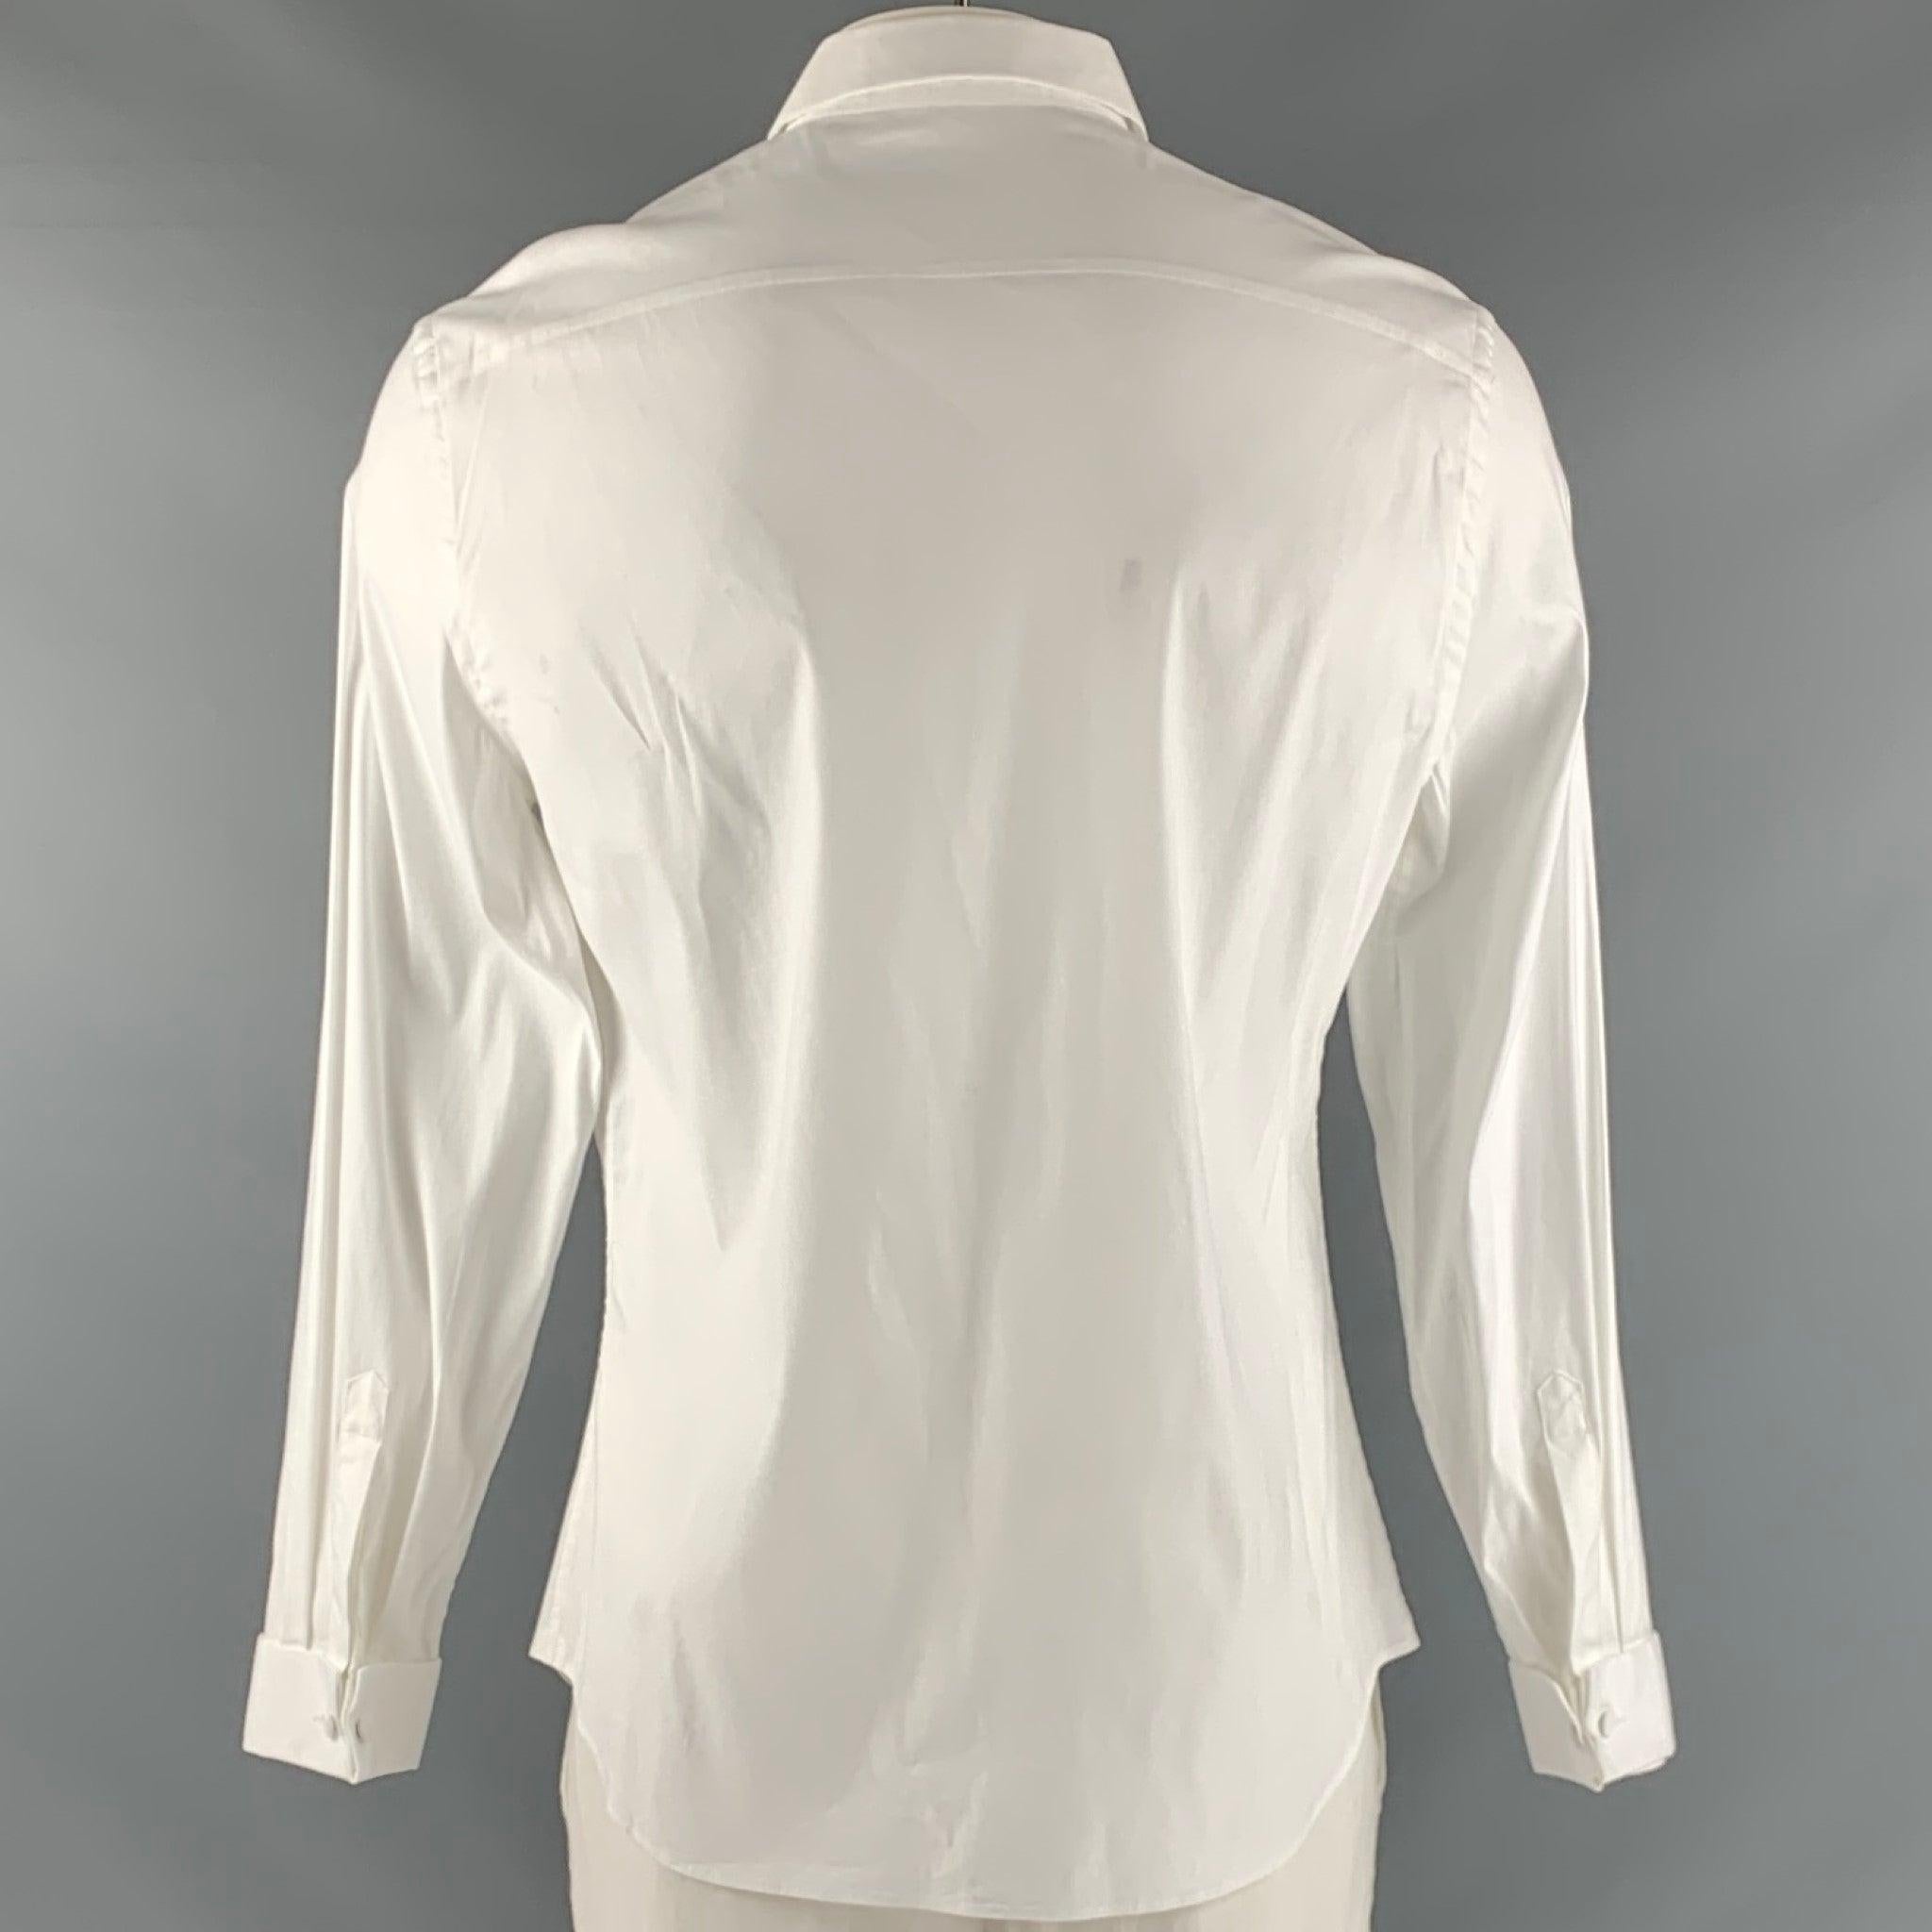 PRADA Size L White Cotton Blend French Cuff Long Sleeve Shirt In Good Condition For Sale In San Francisco, CA